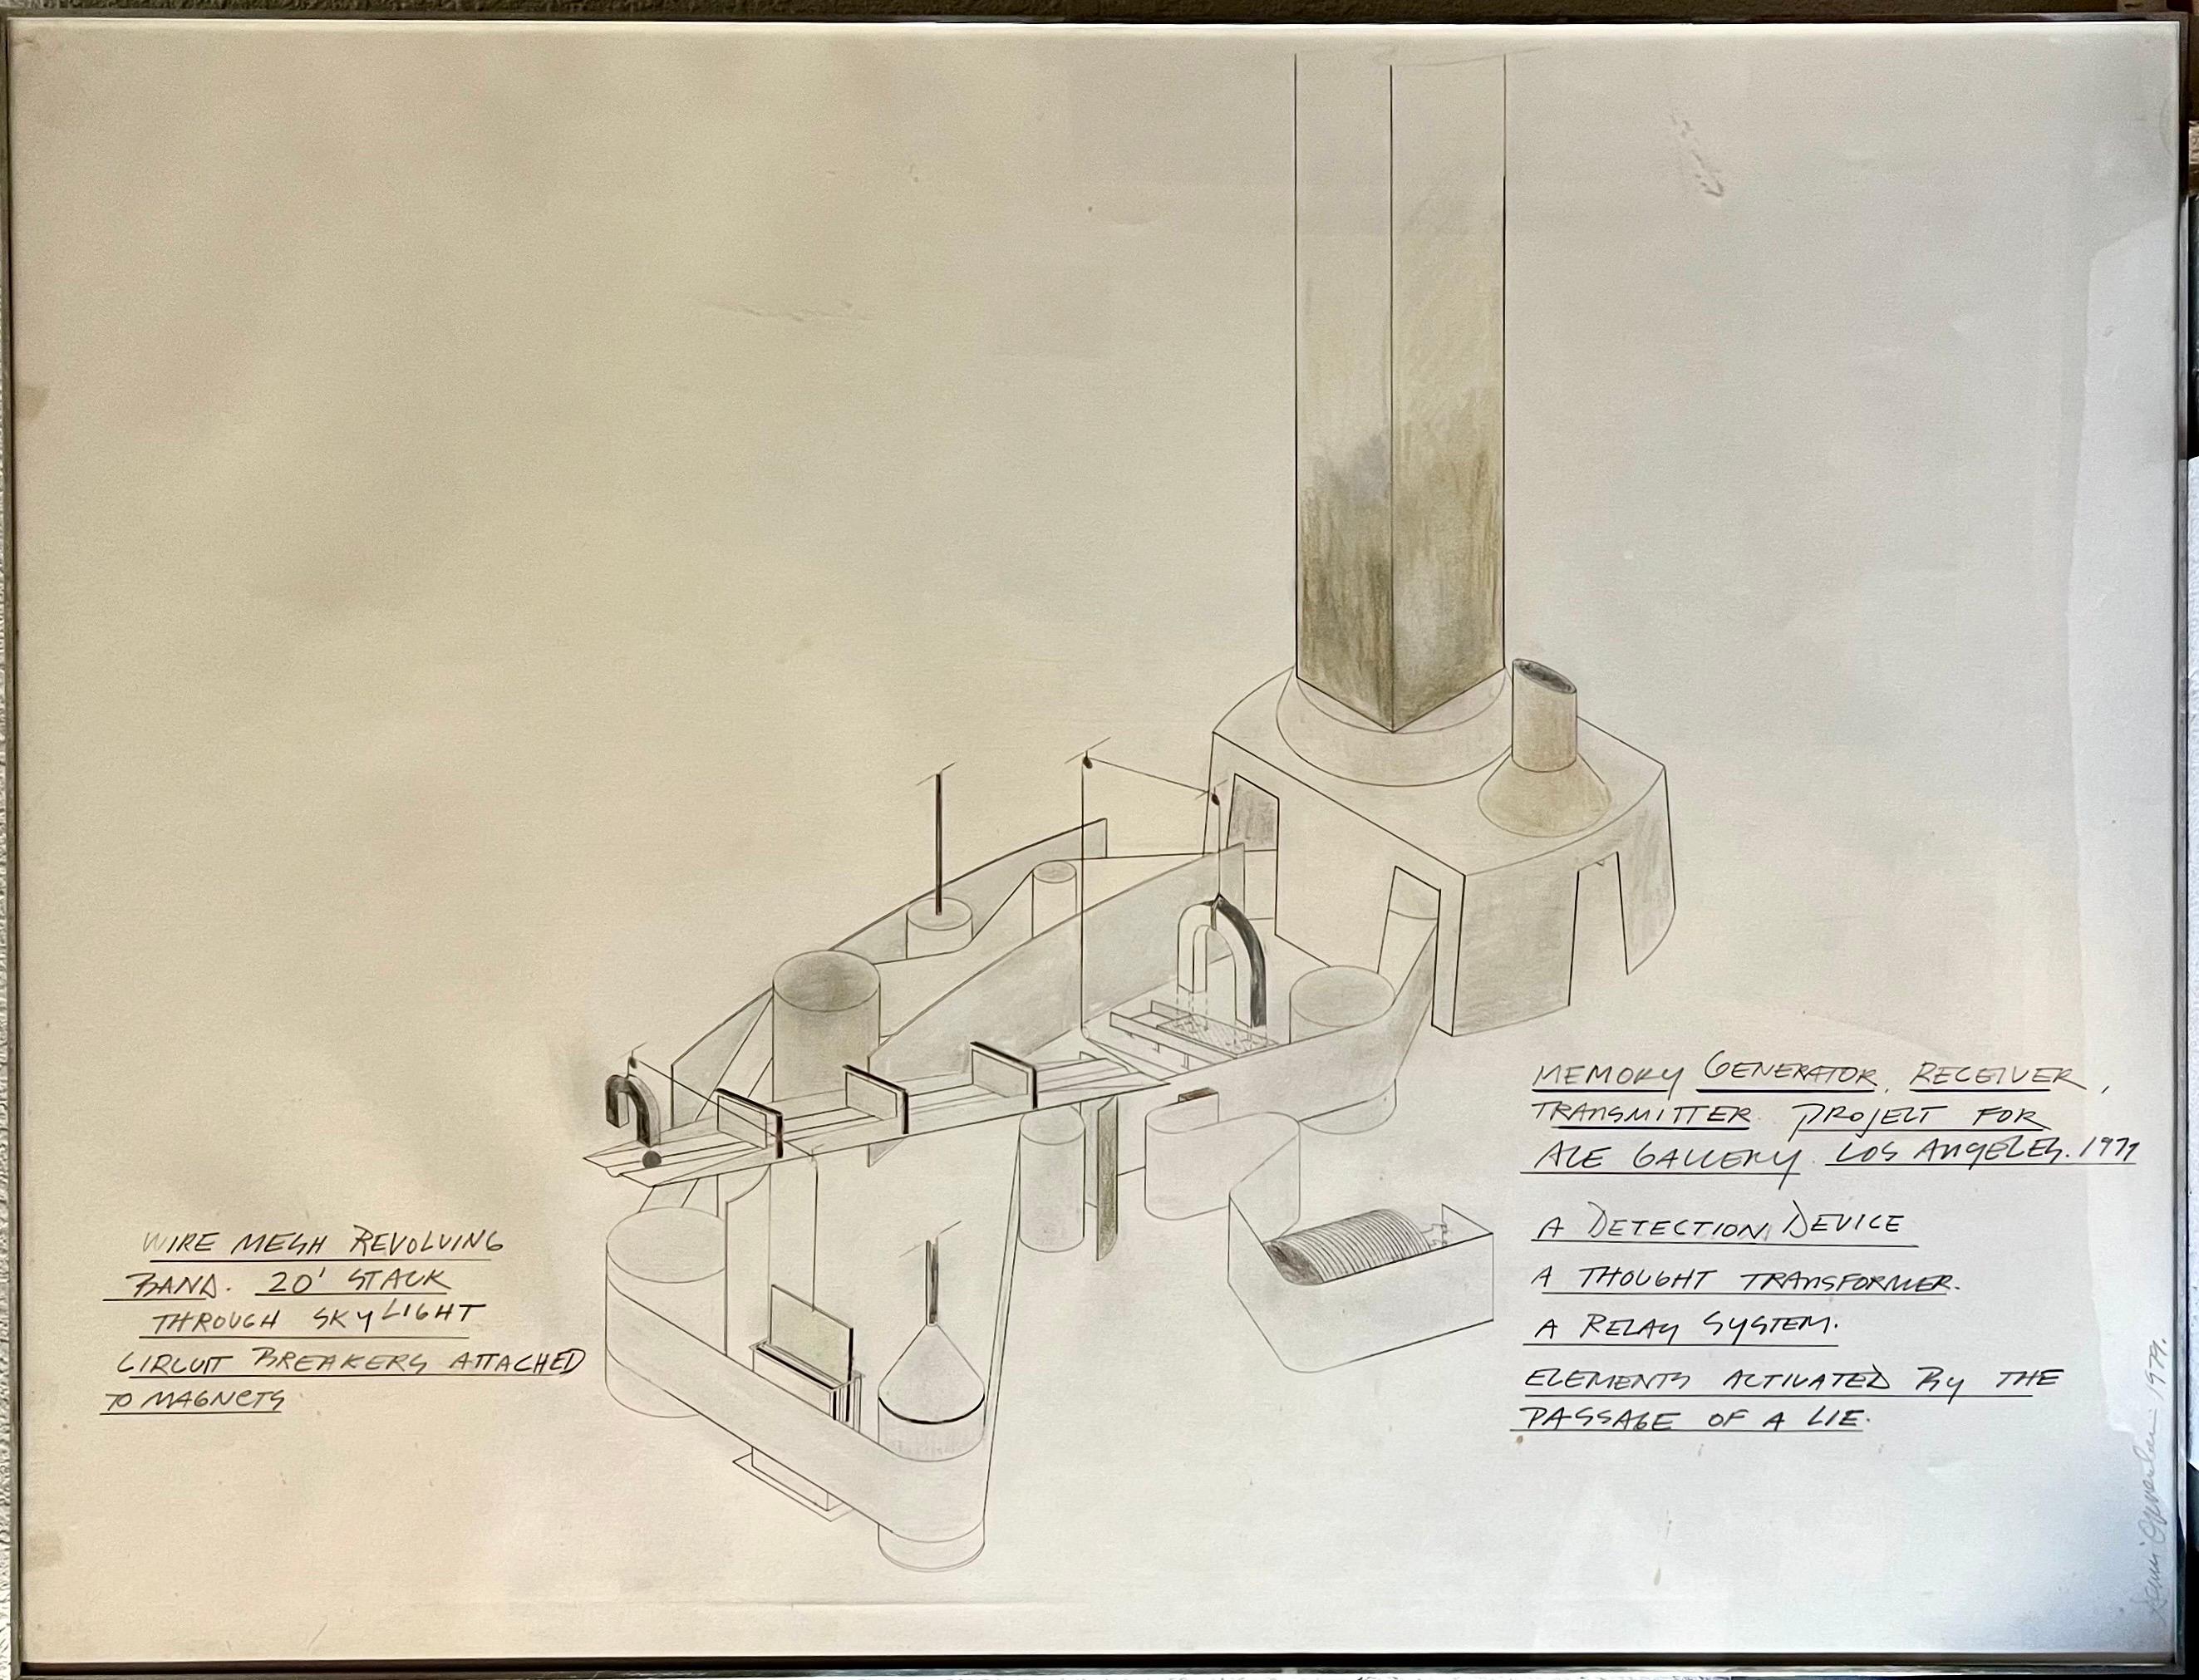 Dennis Oppenheim (1938 - 2011)
Pencil and colored pencil drawing on paper, 
'Memory Generator Receiver; Transmitter project for ACE Gallery Los Angeles'
(possibly with watercolor painting wash or pigment on paper)
Date: 1979
Signed: Hand signed